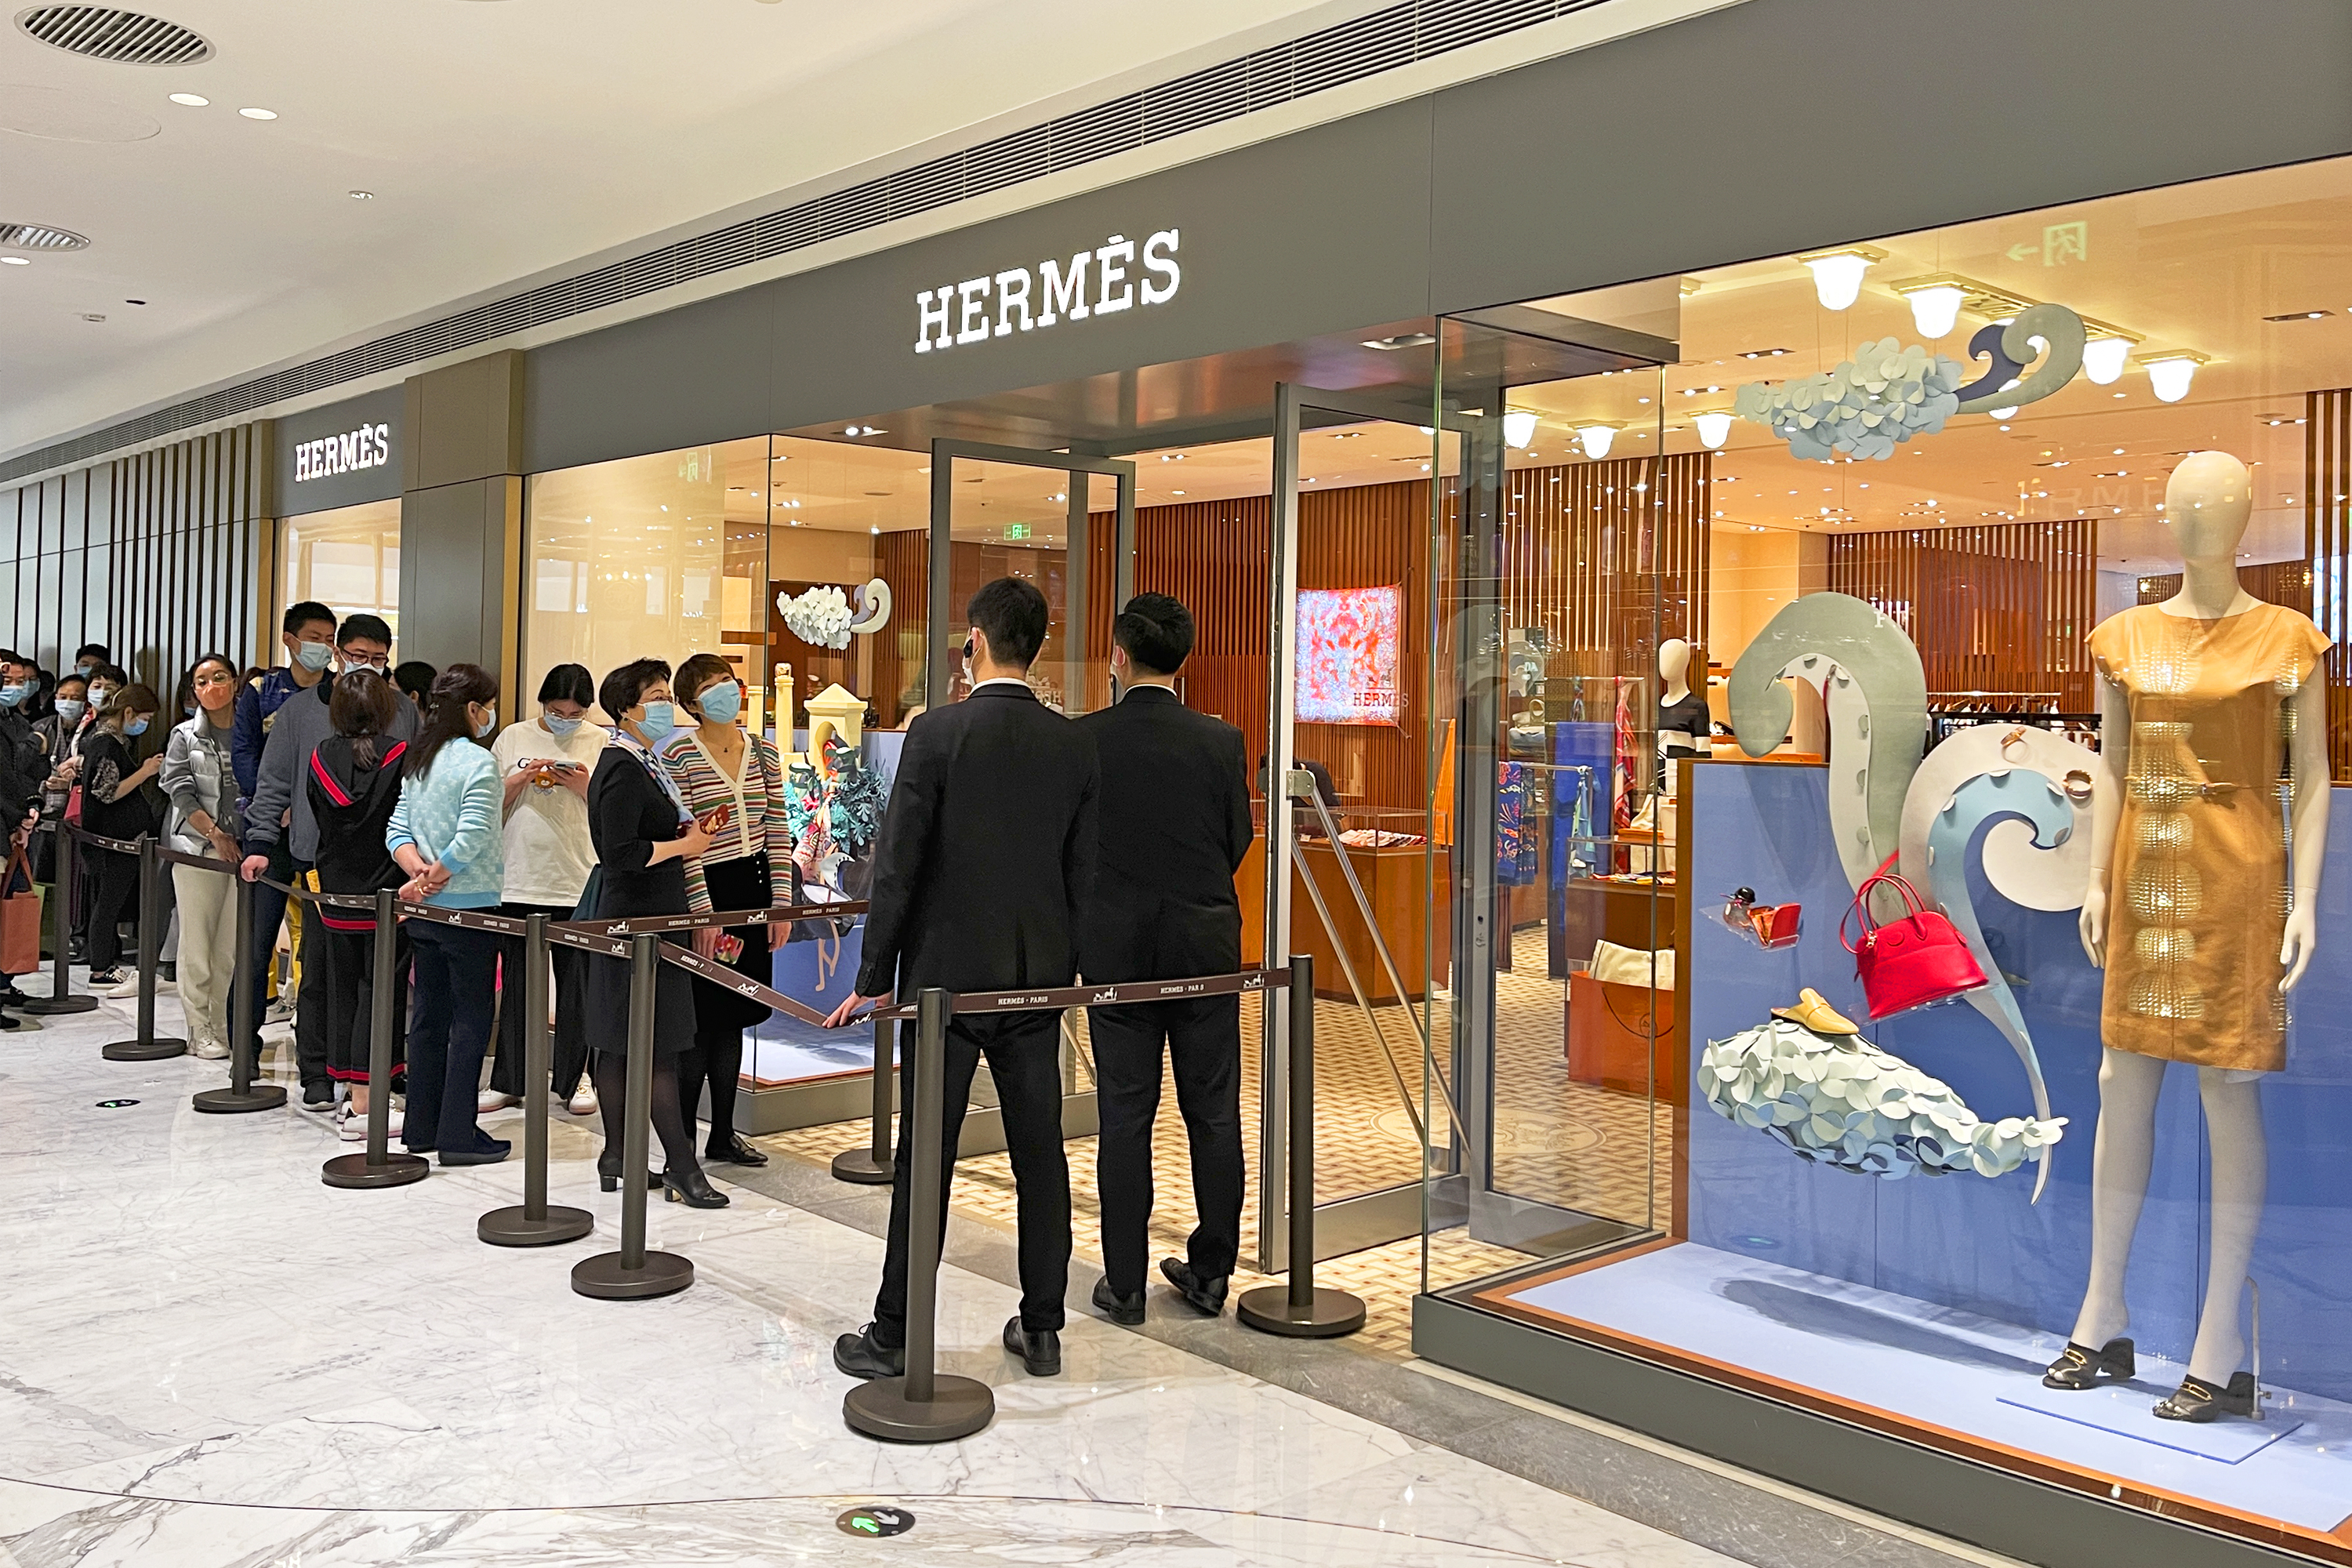 Customers line up outside a Hermès store in Beijing on March 27., 2021. Photo: VCG